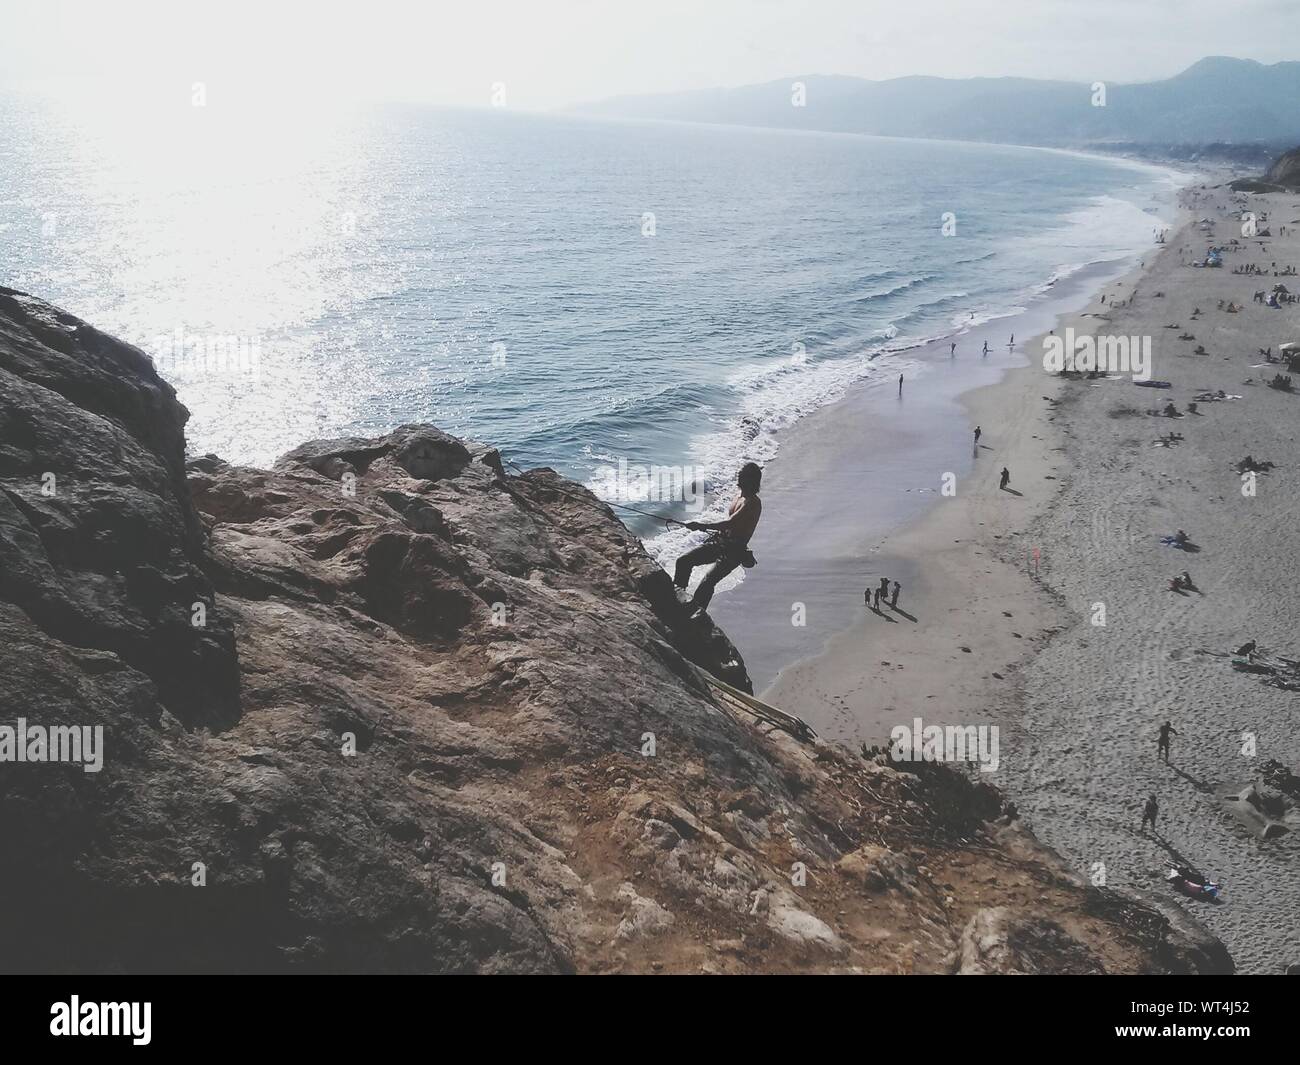 Man Climbing On Cliff By Sea Stock Photo